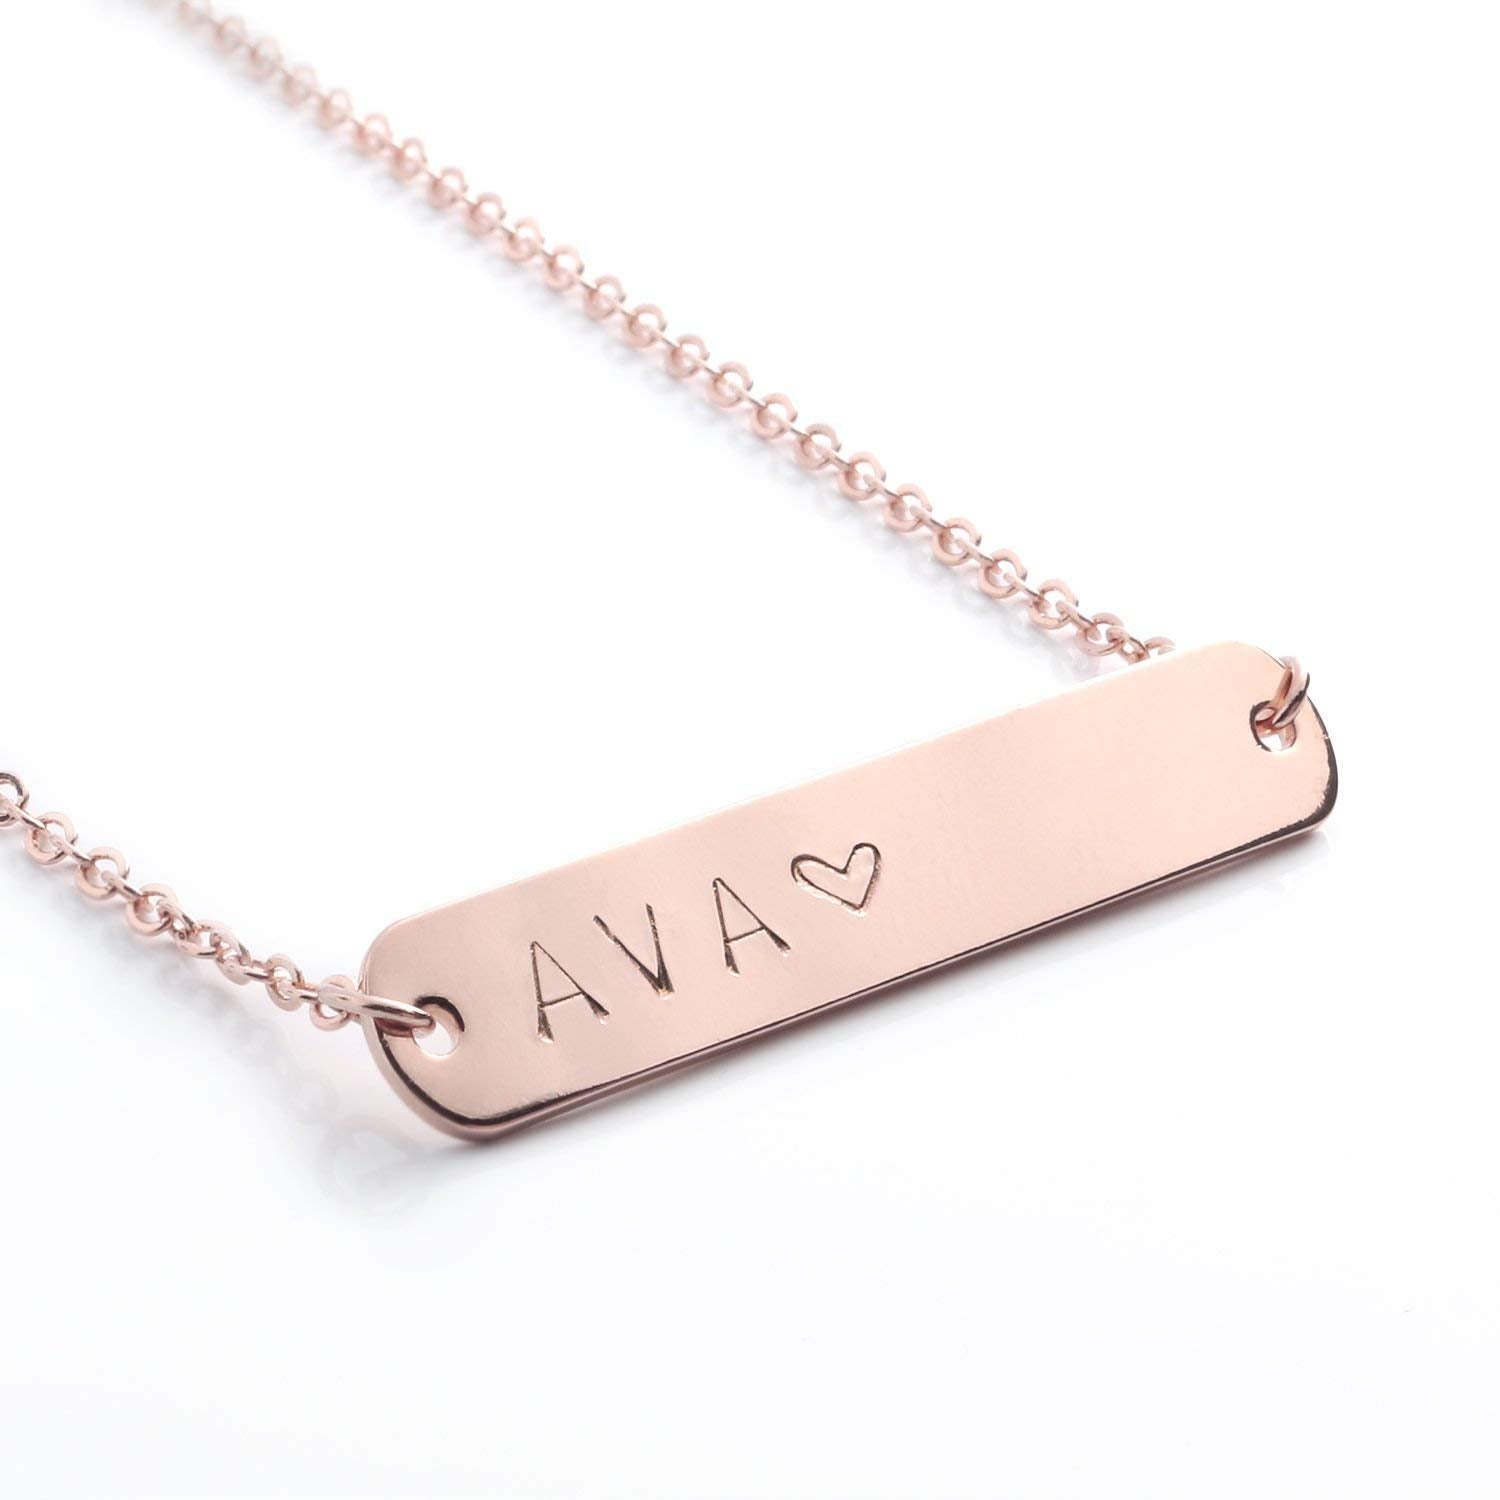 Custom/Personalized Nameplate Necklace